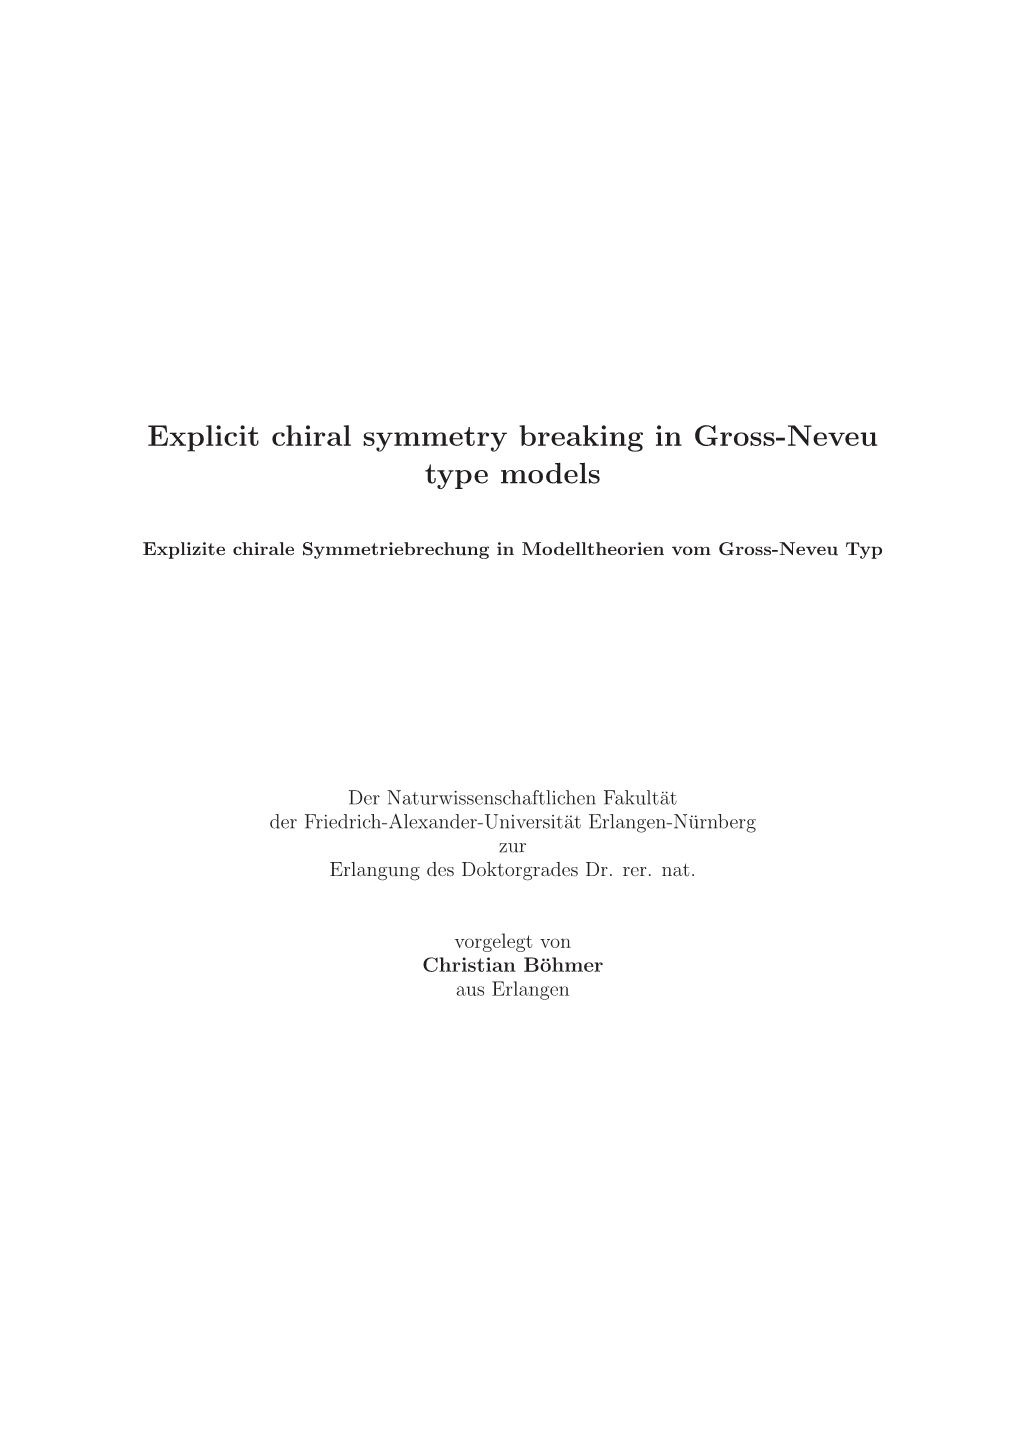 Explicit Chiral Symmetry Breaking in Gross-Neveu Type Models